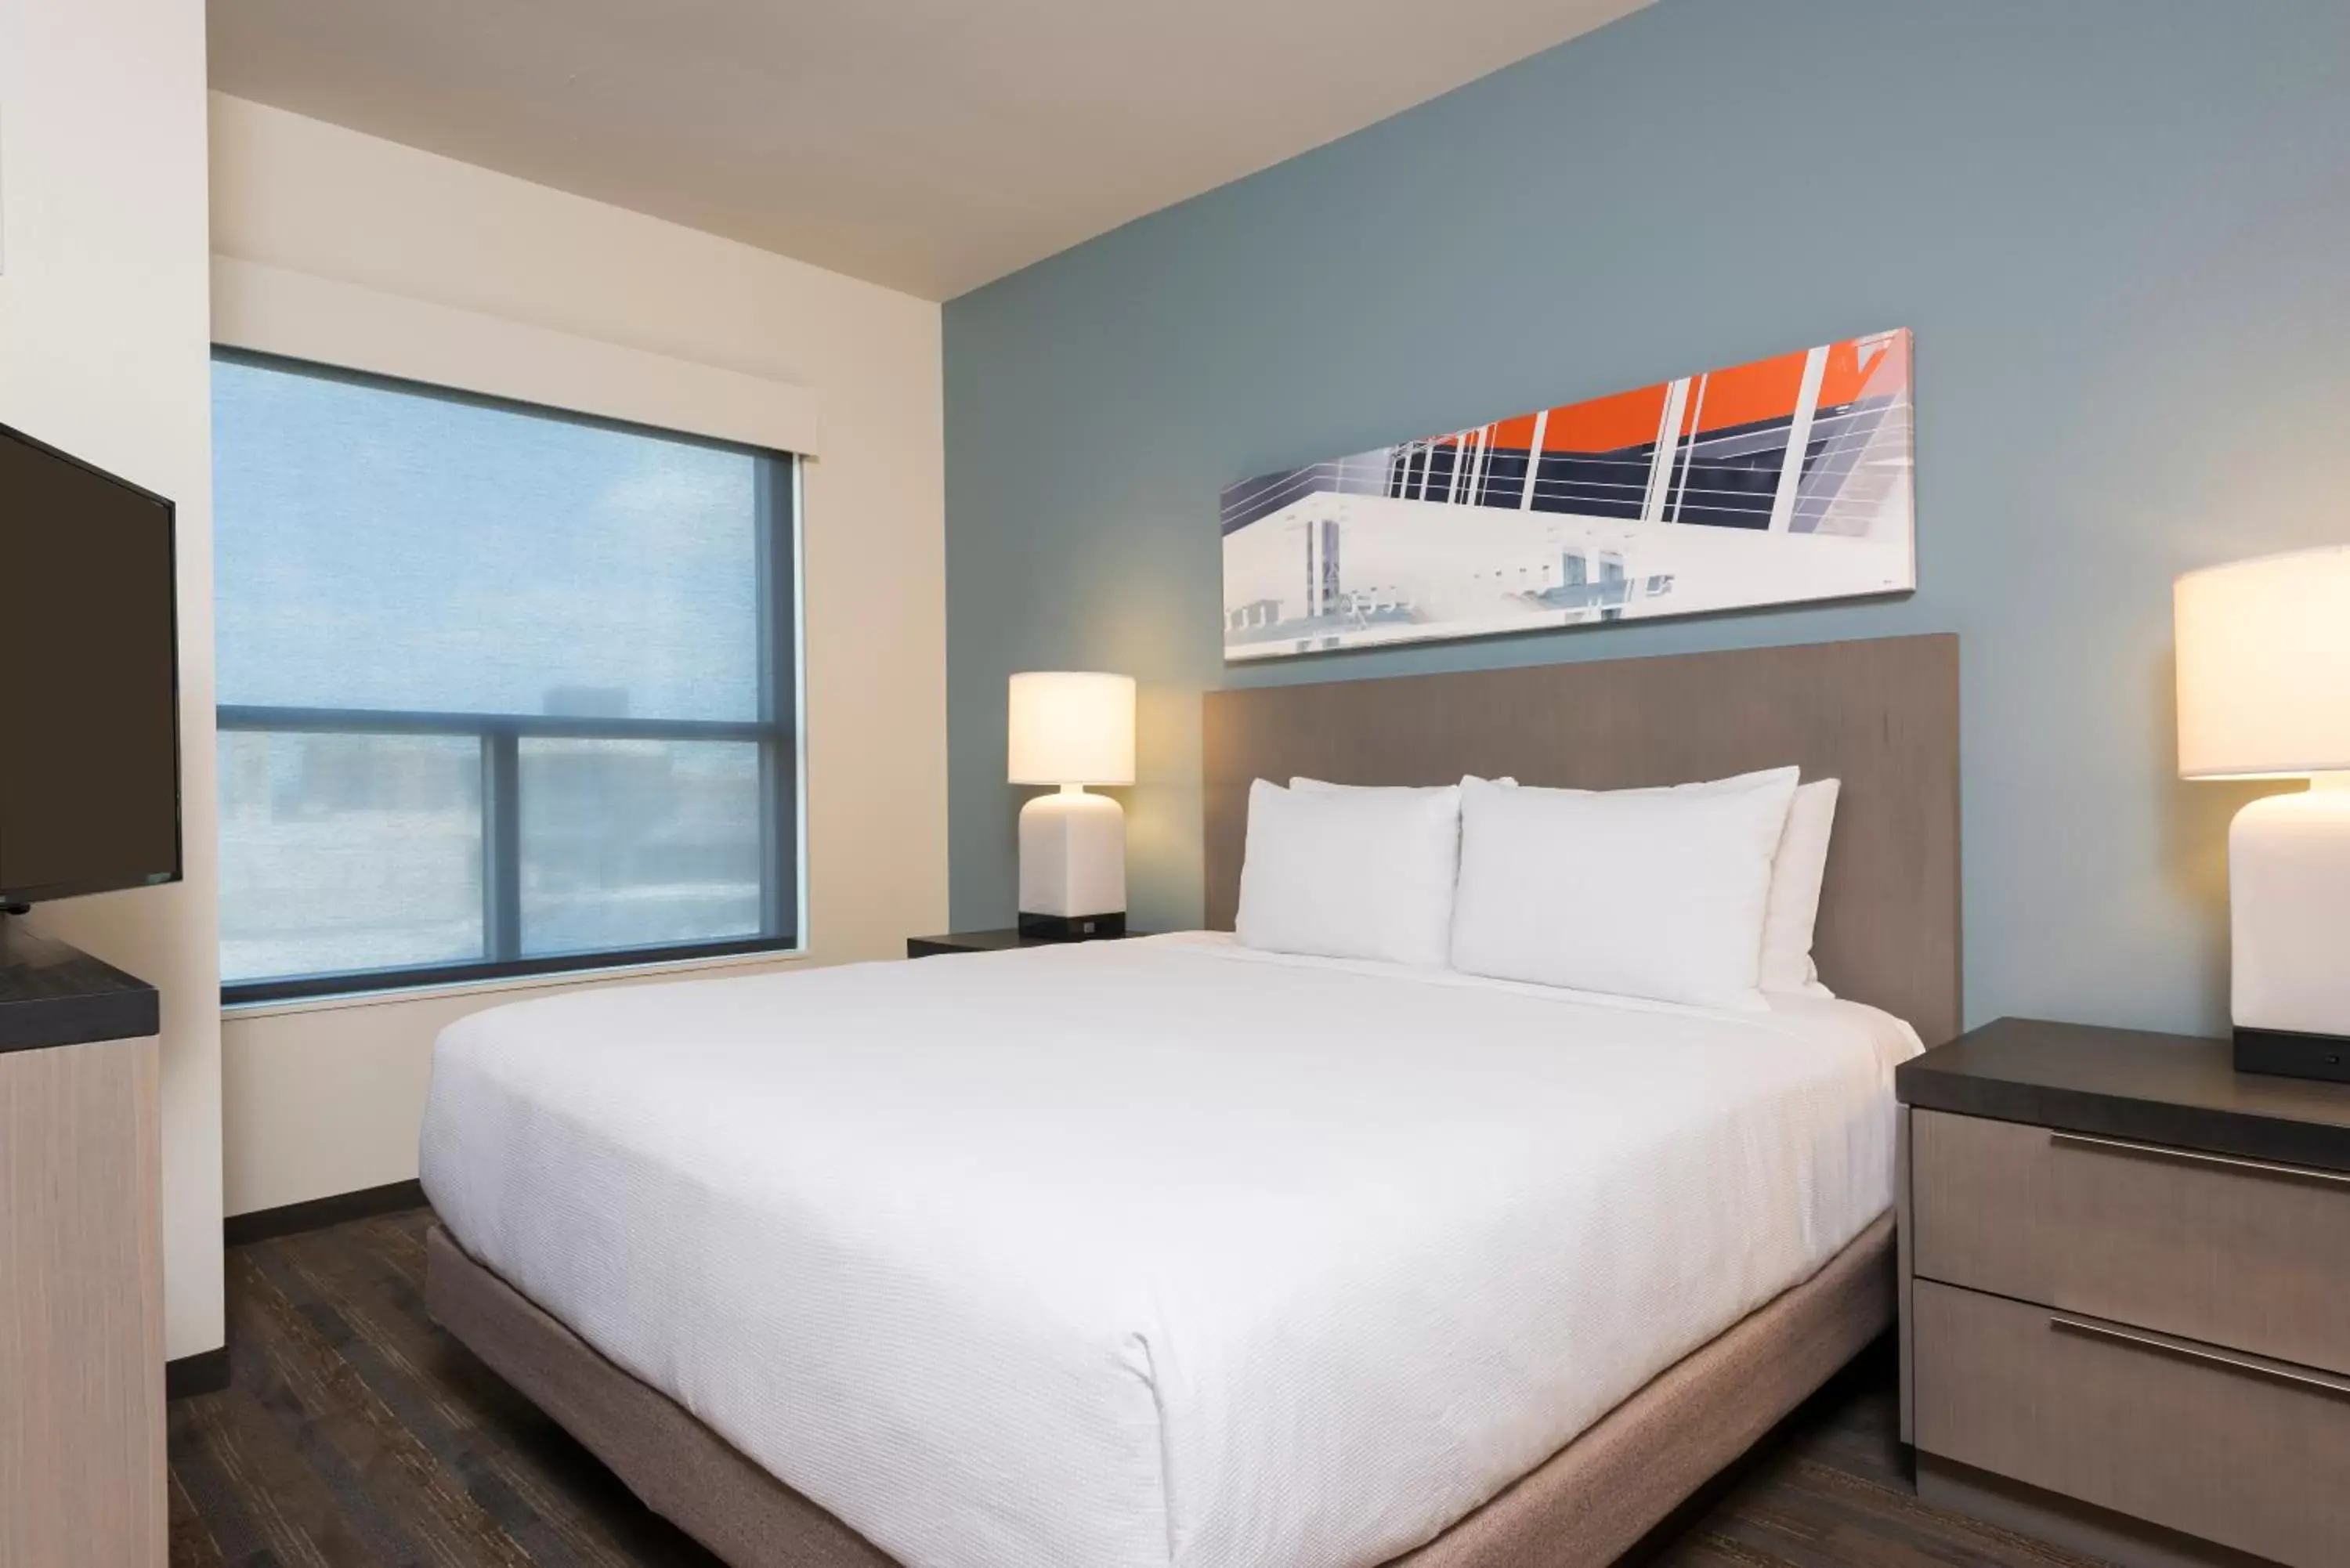 King Studio Suite with Kitchen and Sofa Bed - High Floor in Hyatt House Austin/Downtown